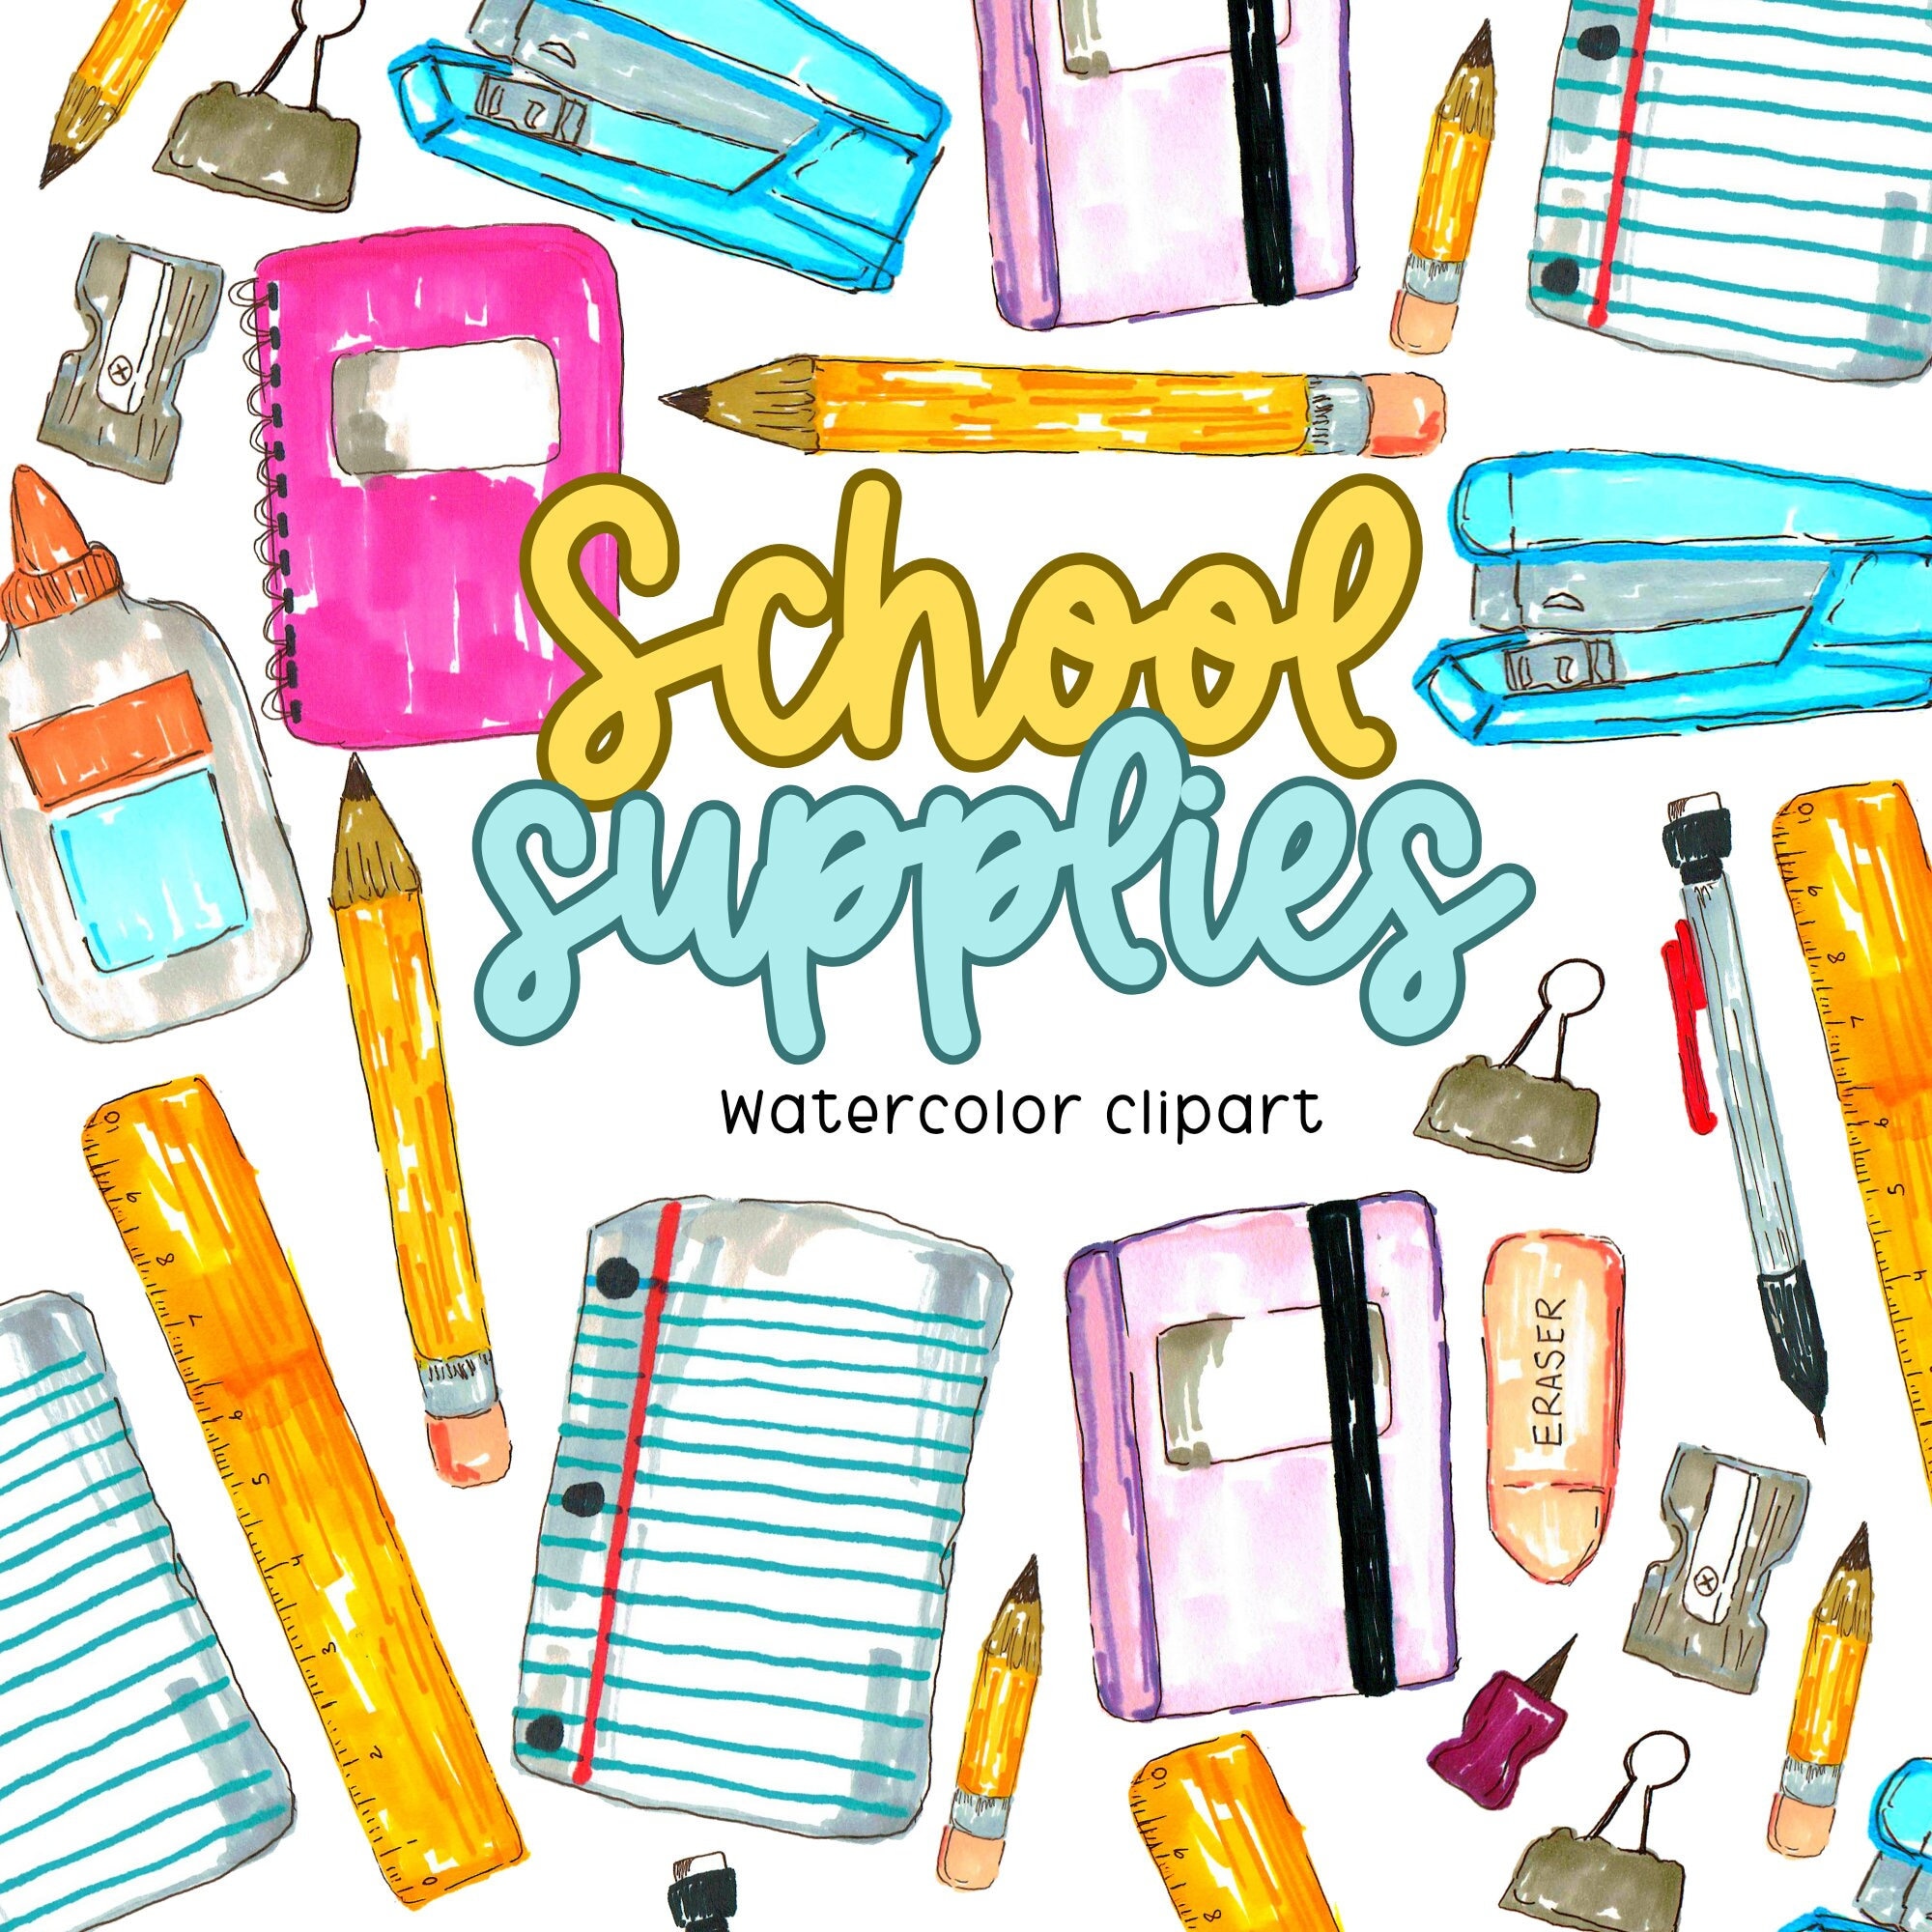 Back to School Clipart School Supplies Clipart, Backpack, Science Clipart,  Art Supplies, Hand Drawn Clipart, Scrapbooking Printables 